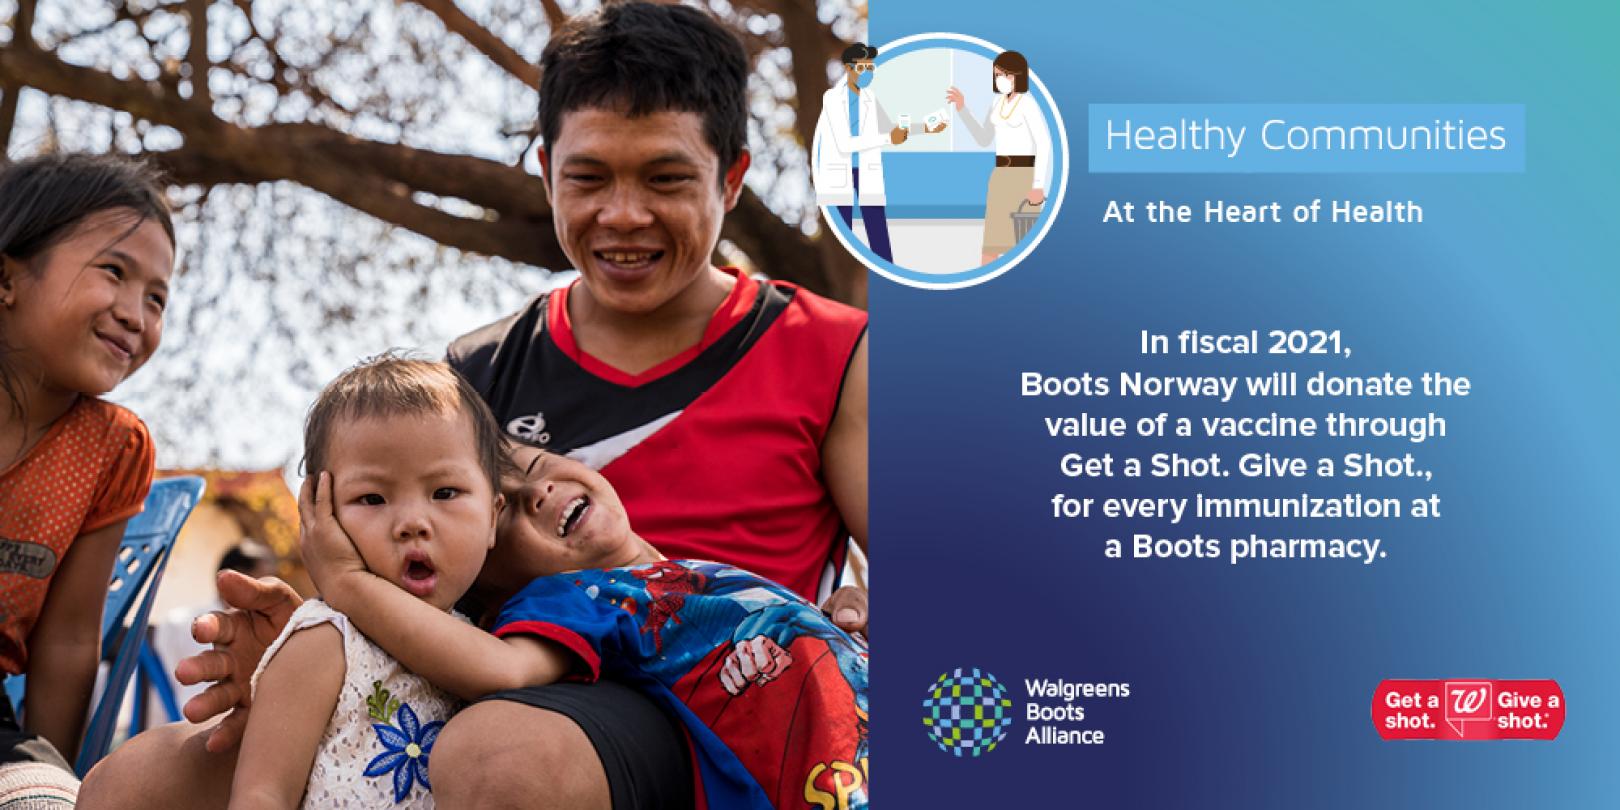 Boots Norway will donate the value of a vaccine through ‘Get a Shot. Give a Shot.’ Twitter LinkedIn